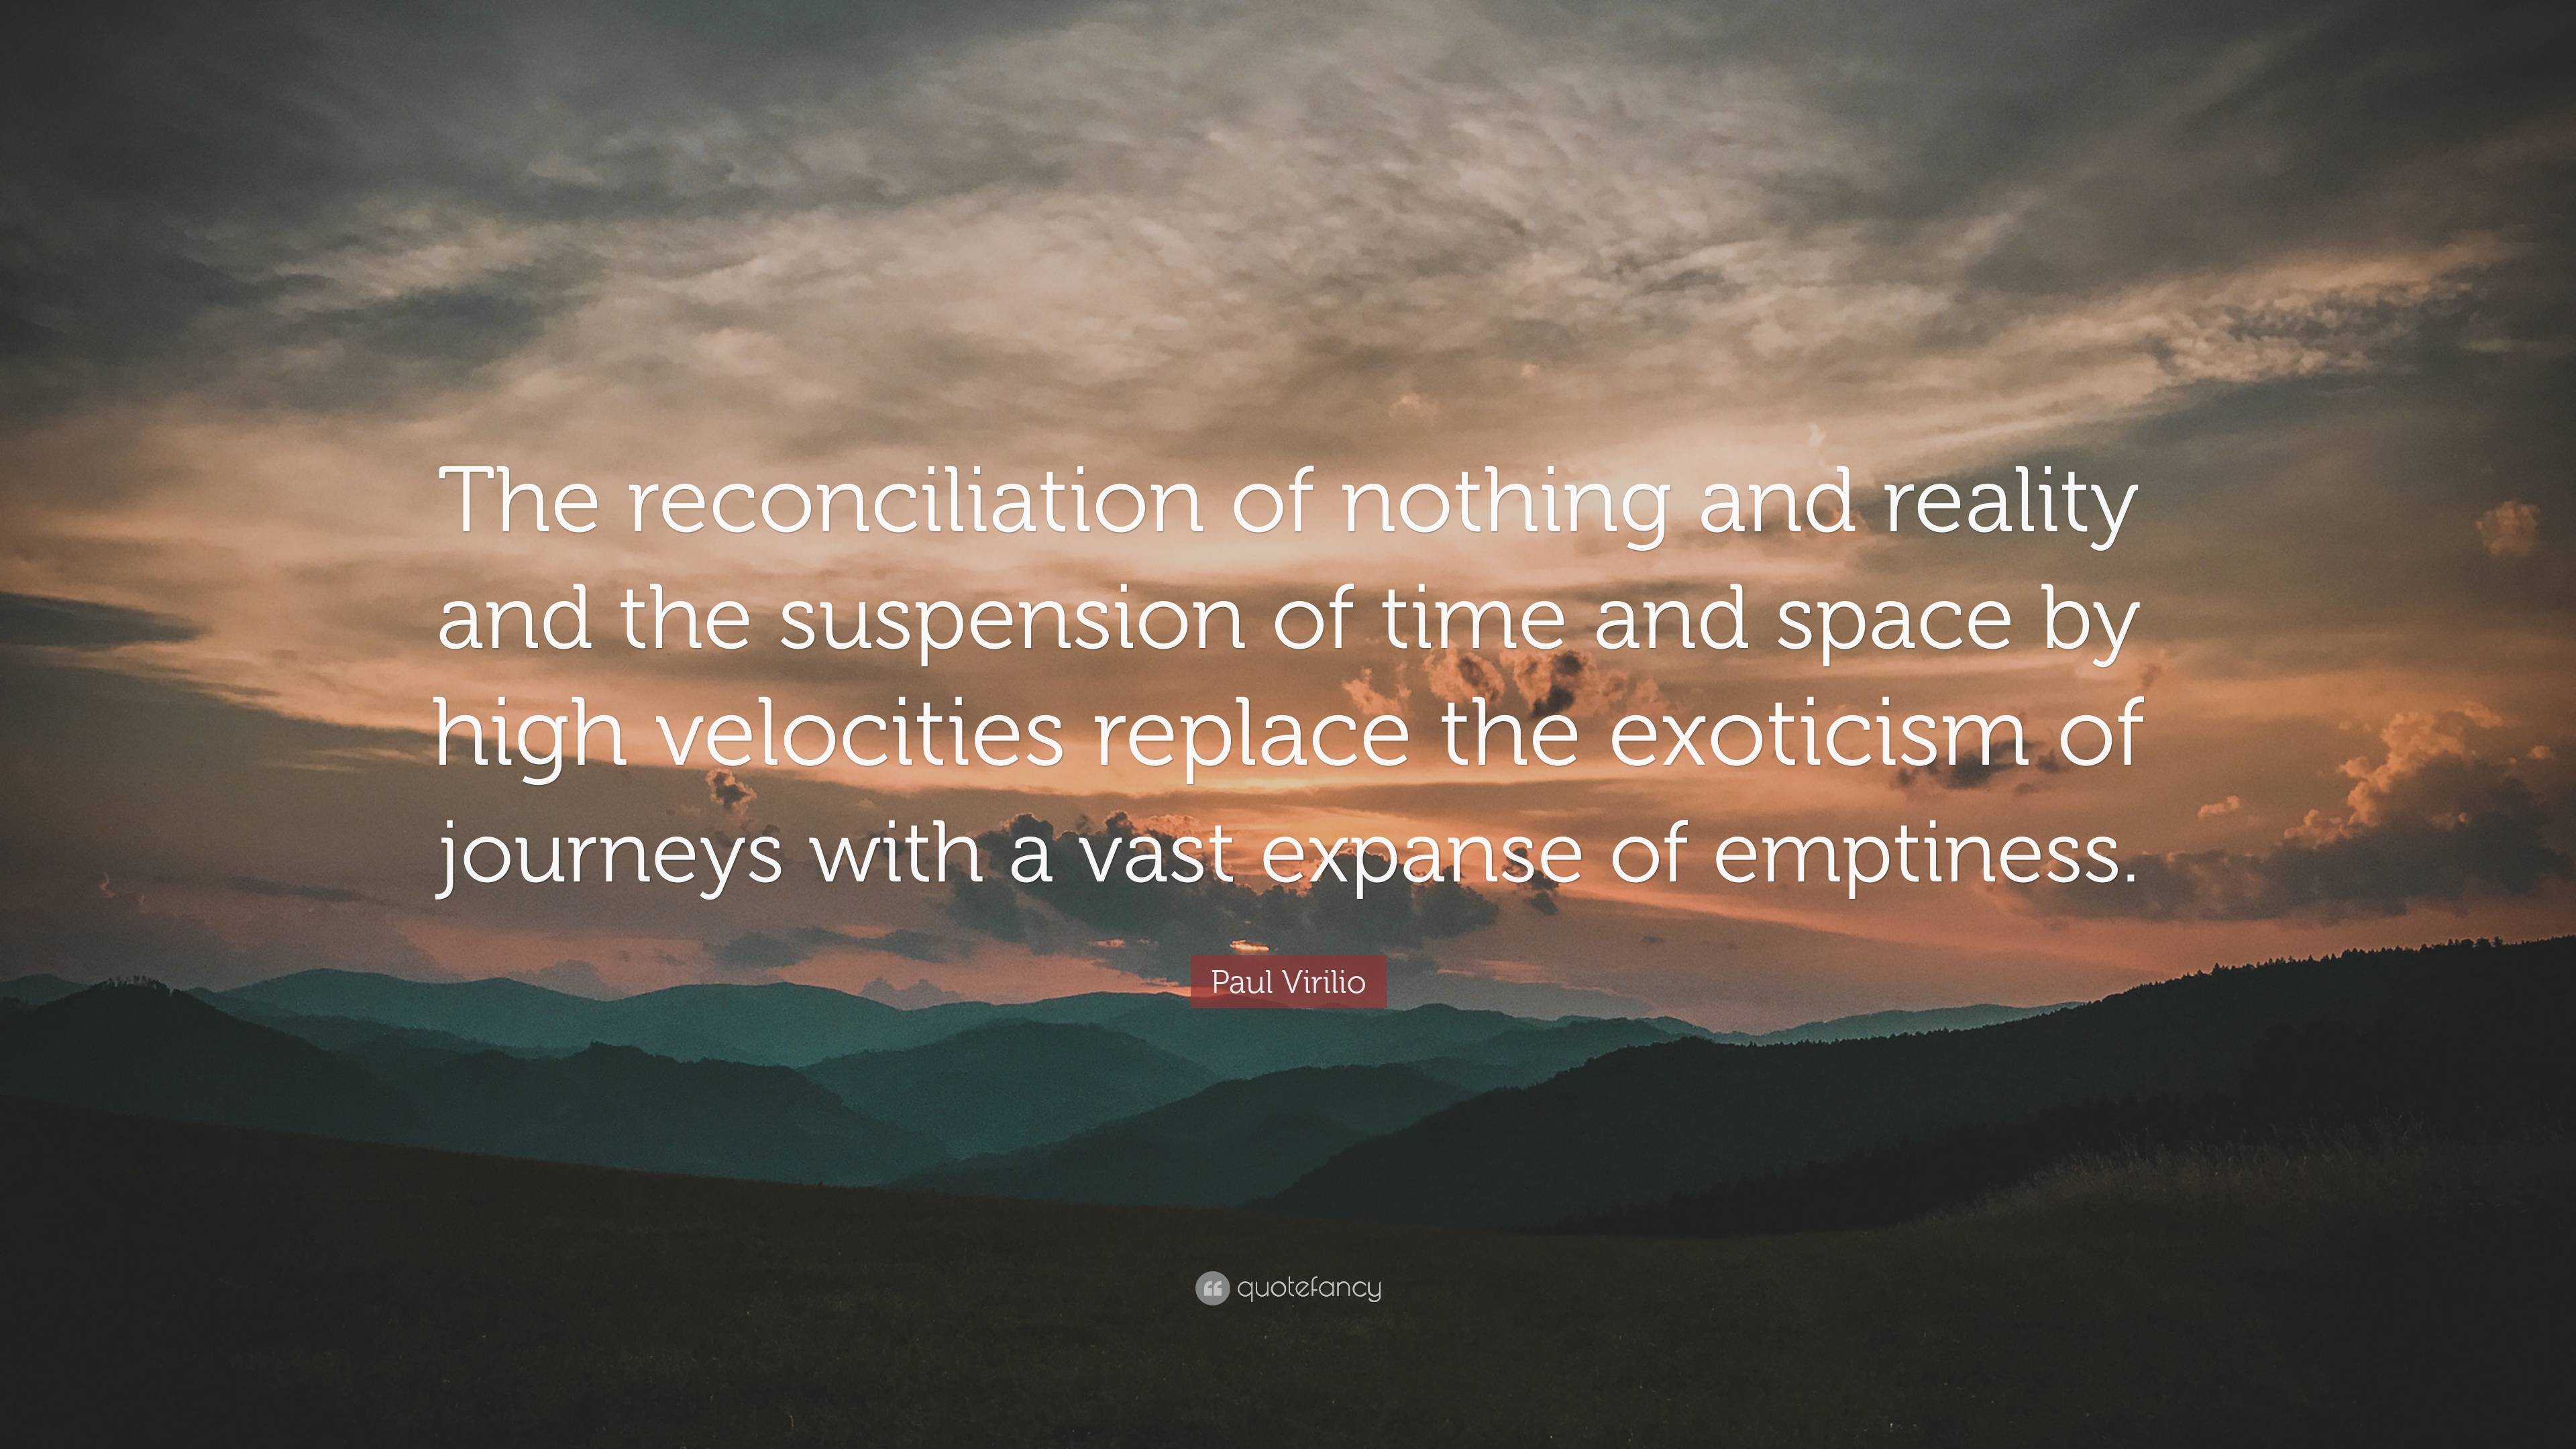 Paul Virilio Quote: “The reconciliation of nothing and reality and the ...